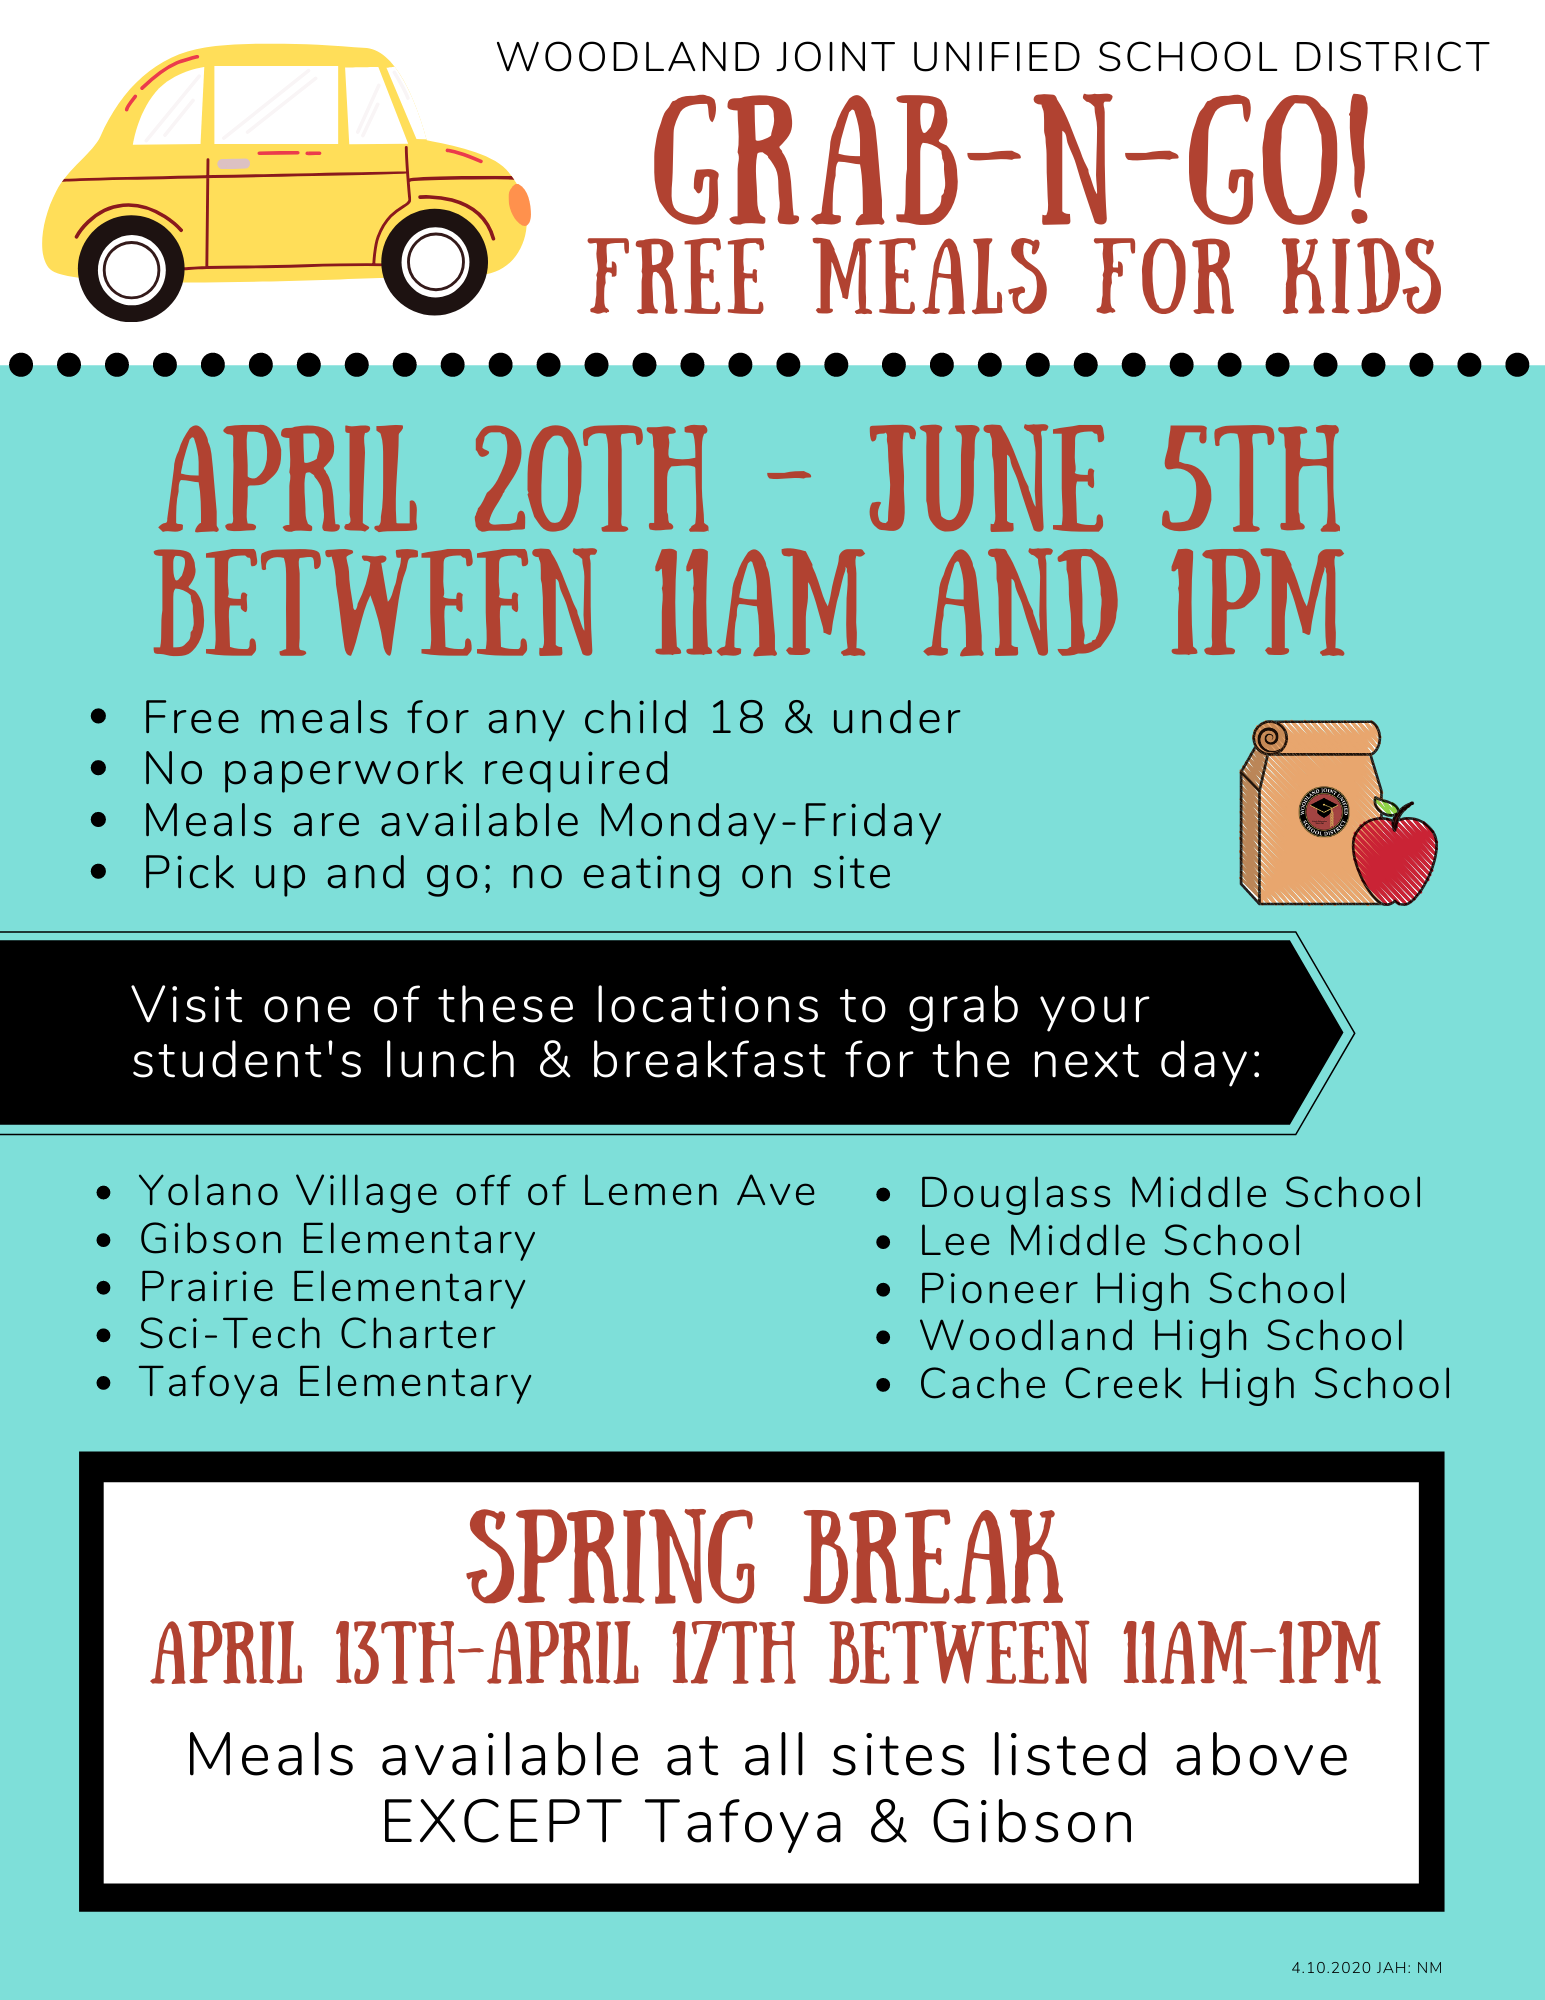 Grab and go free meals for kids through May first 11 AM to 1 PM